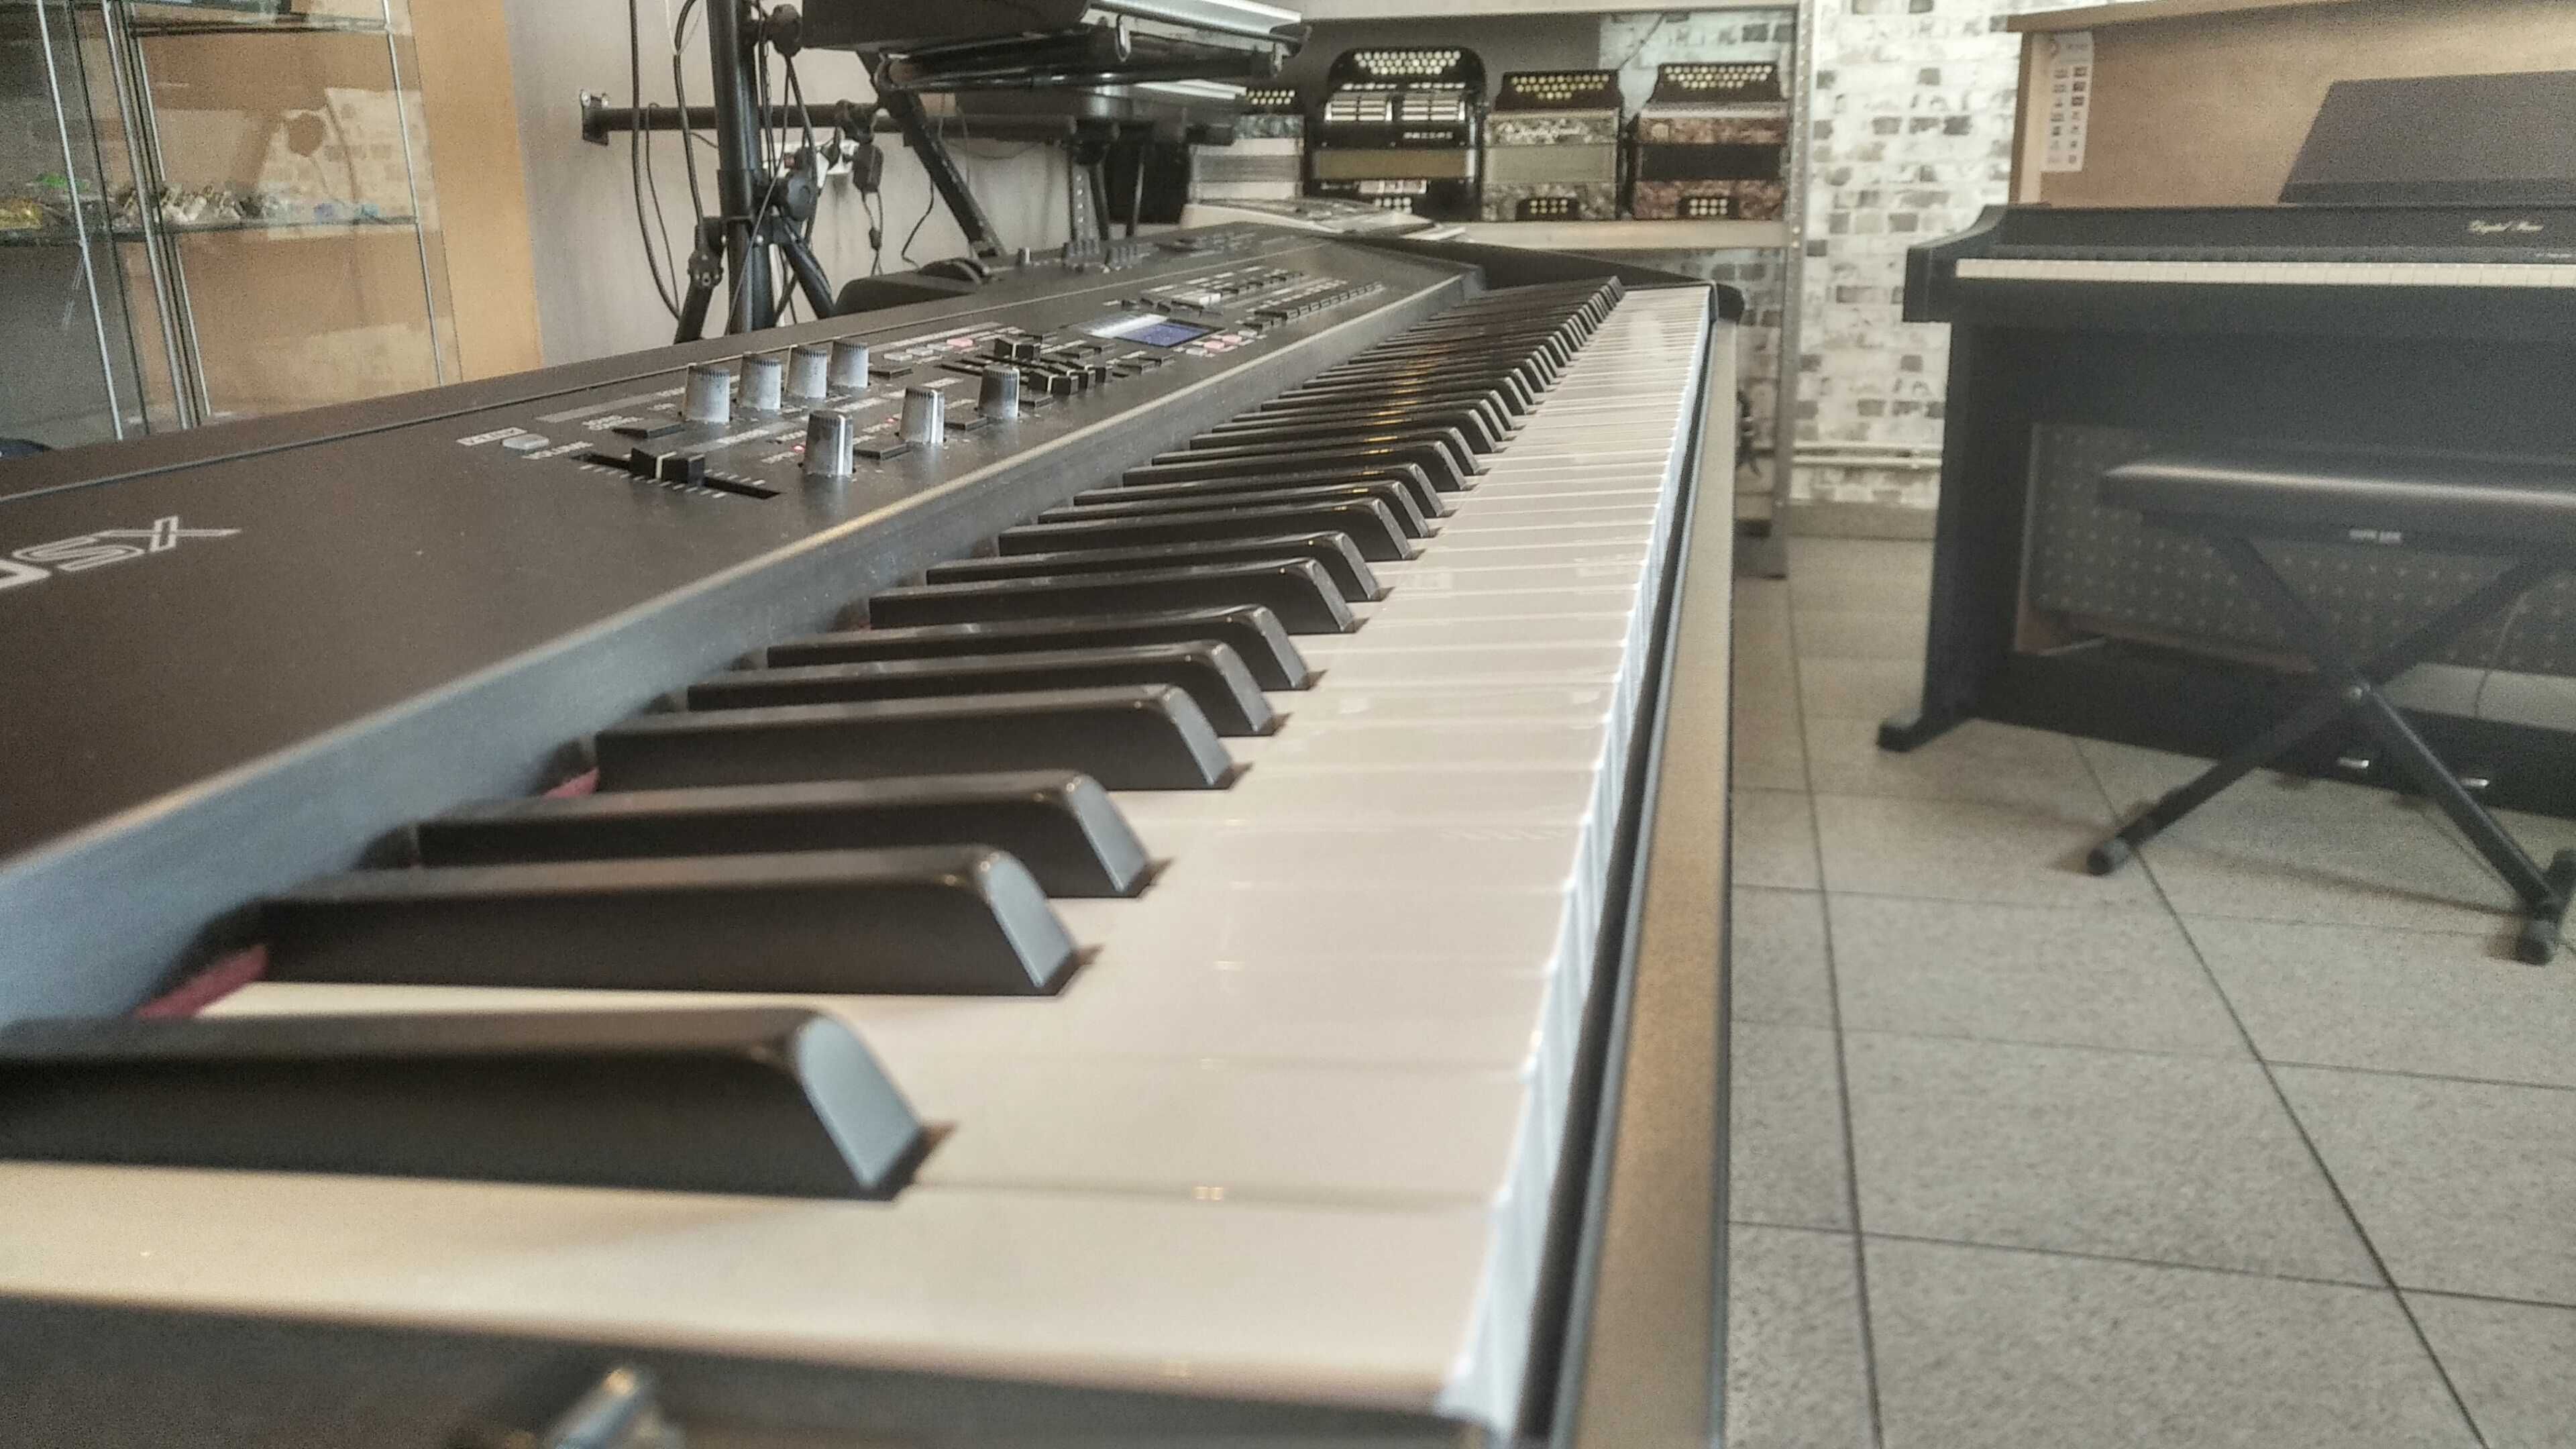 Stage Piano Roland RD-700sx